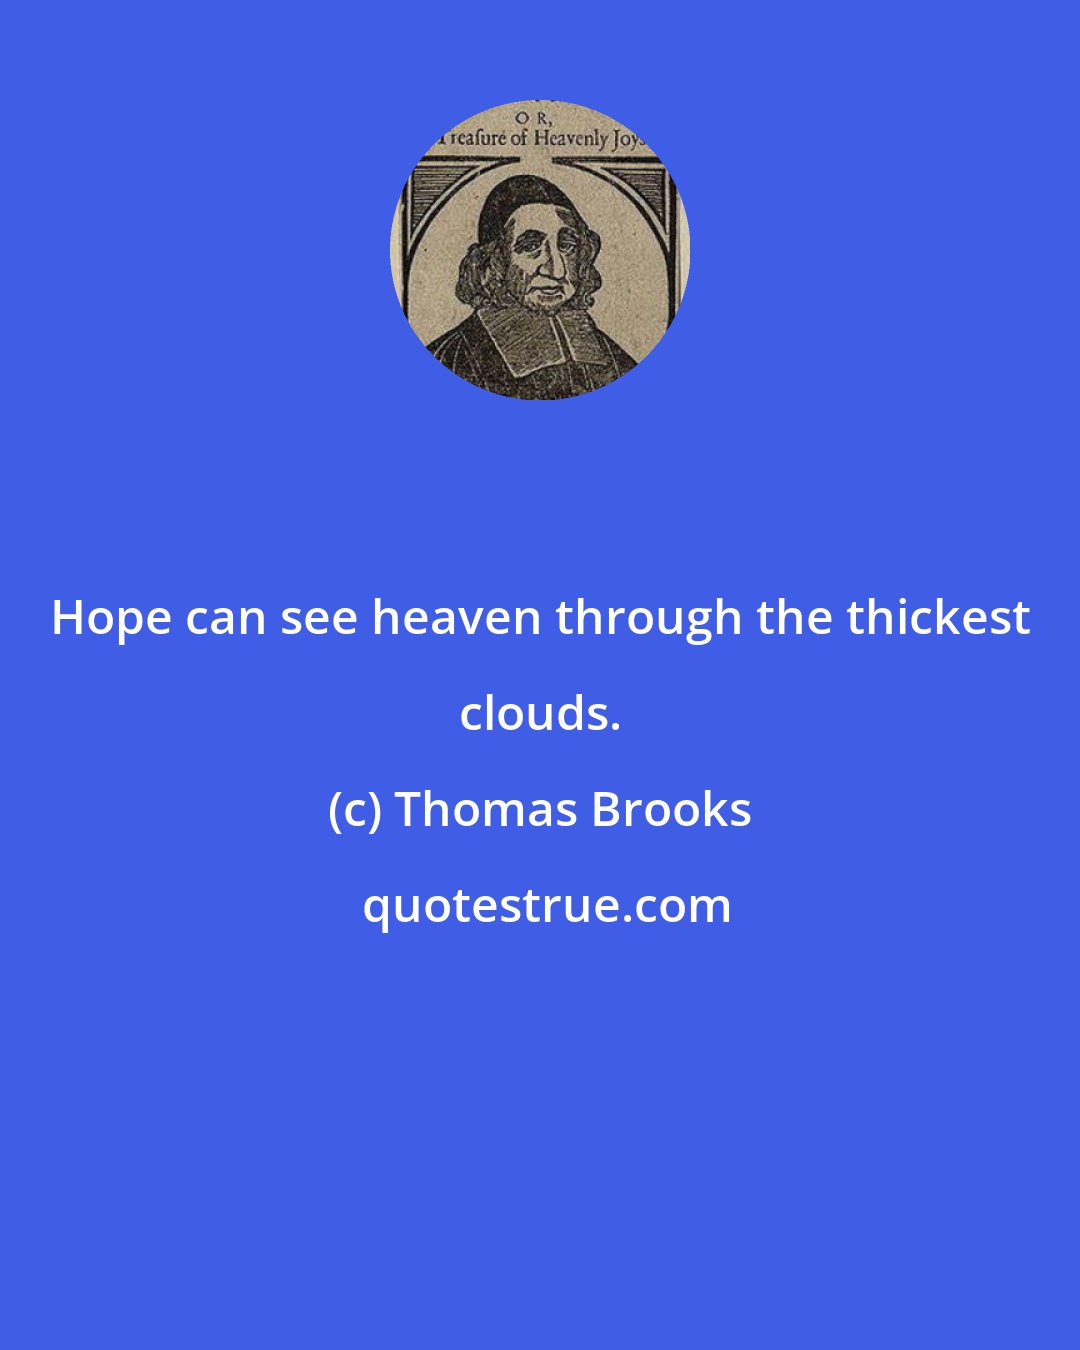 Thomas Brooks: Hope can see heaven through the thickest clouds.